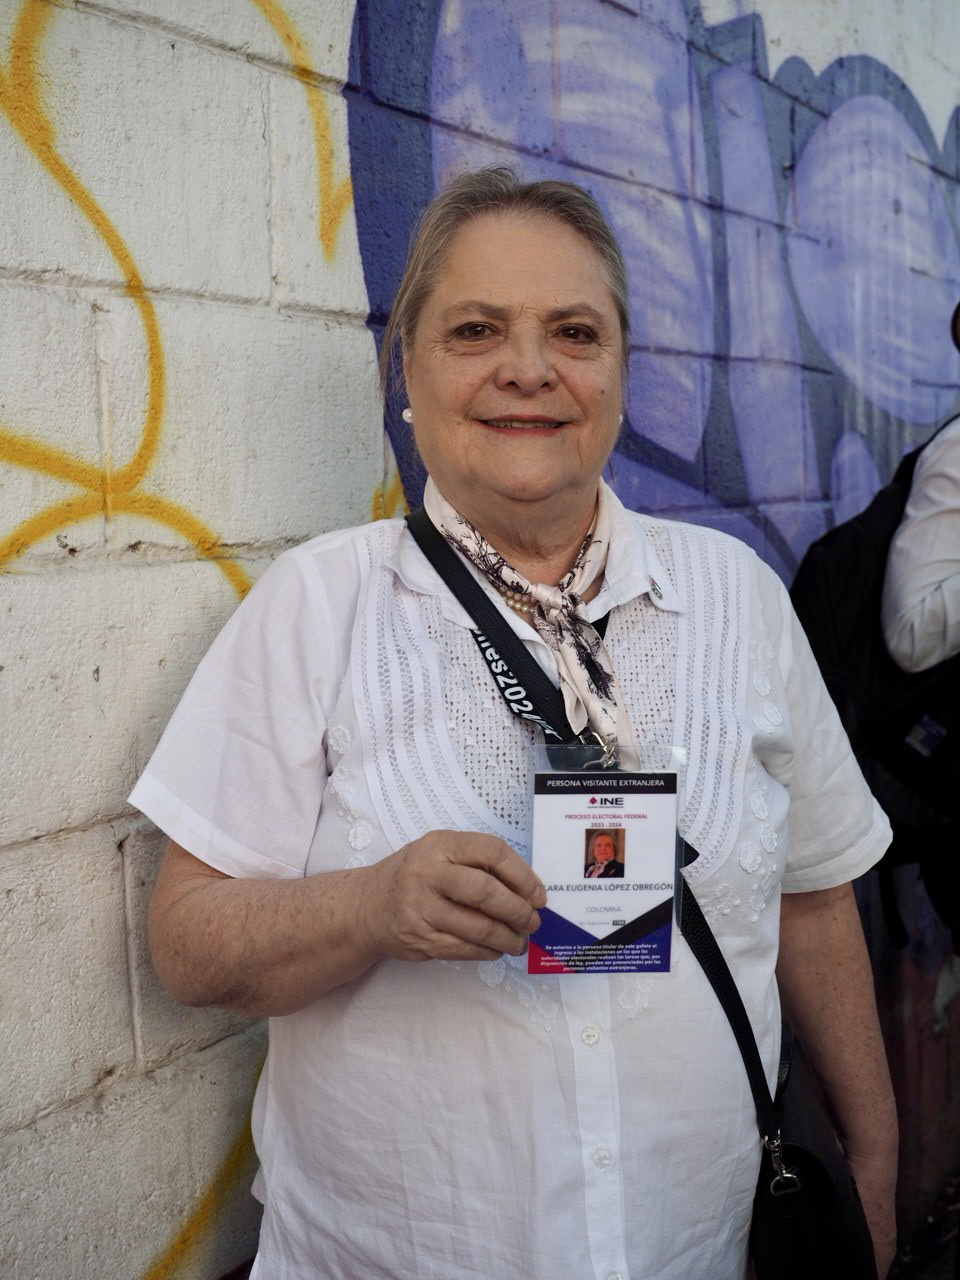 Colombian Senator Clara López Obregón shows her official credential from Mexico's electoral authority before proceeding to the first stop on her election observation mission in Mexico City on June 2, 2024.